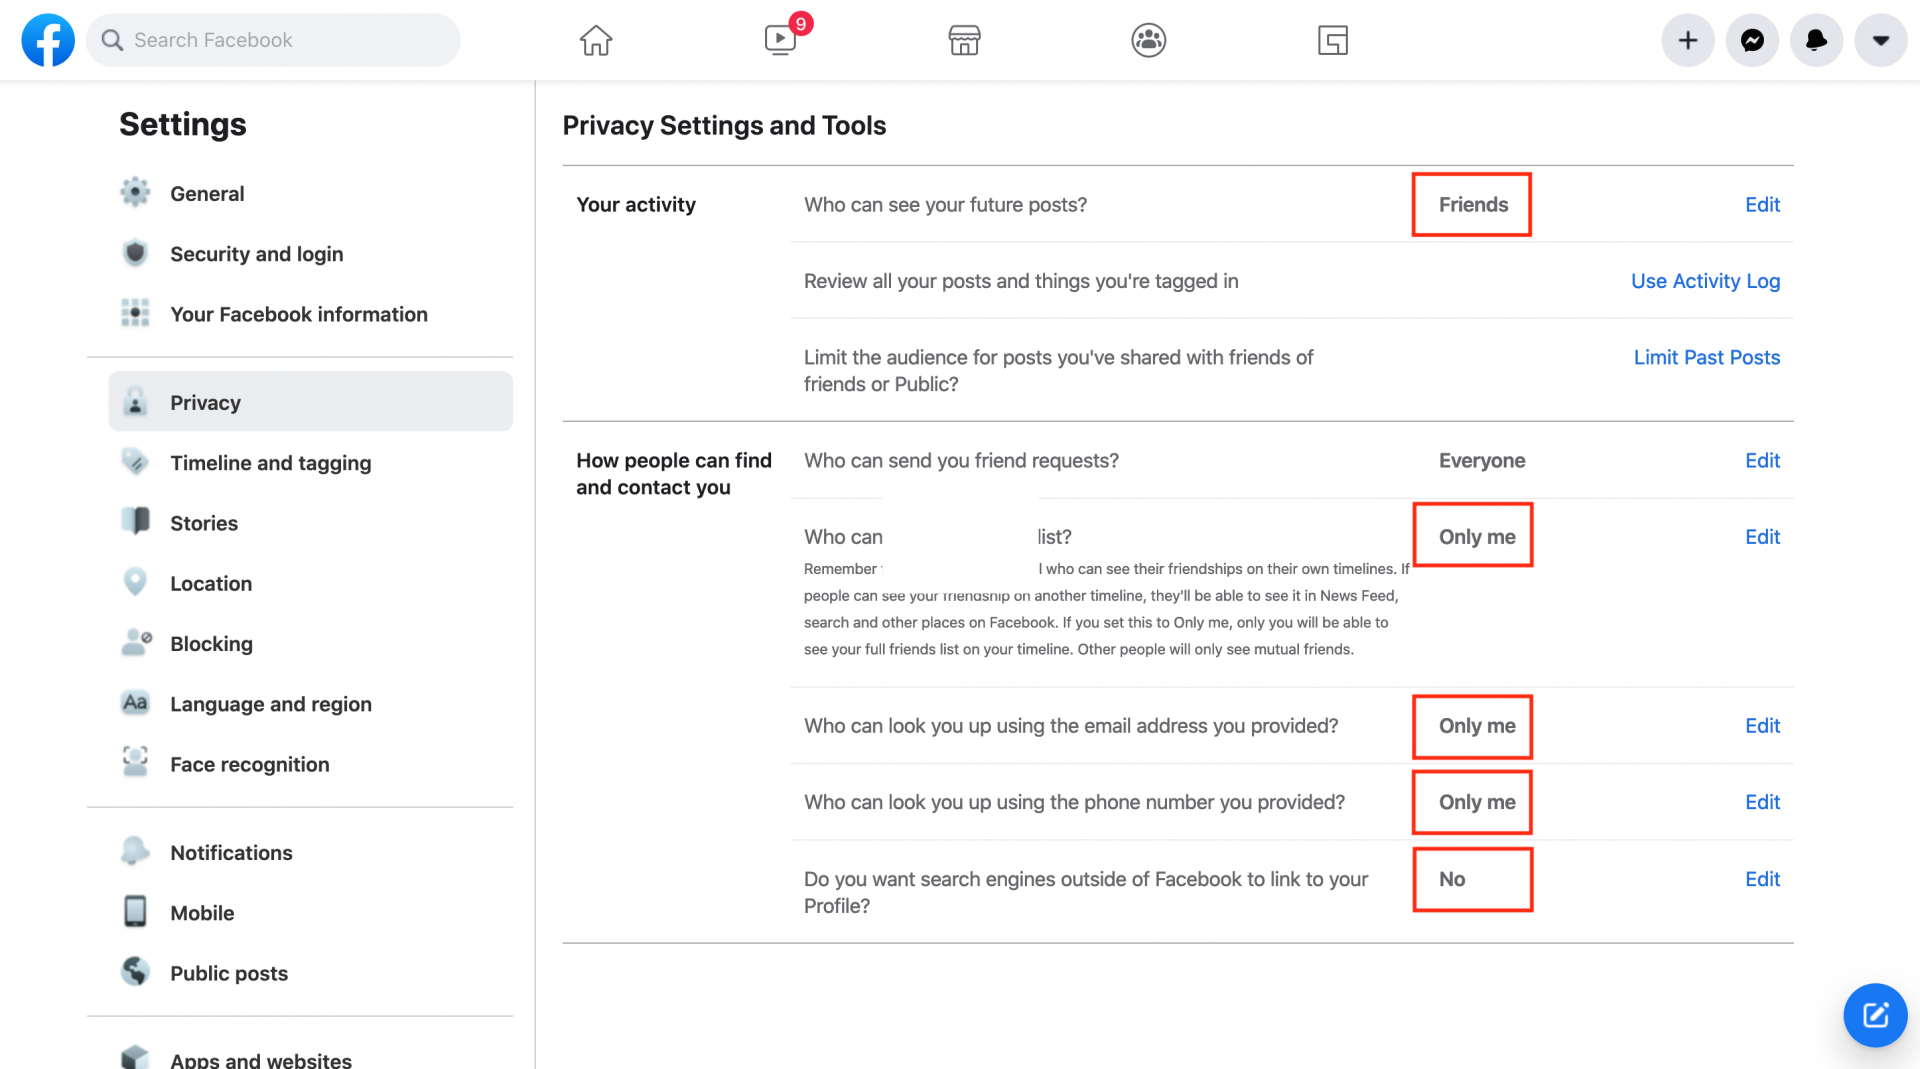 Facebook wants you to double check your privacy settings, again